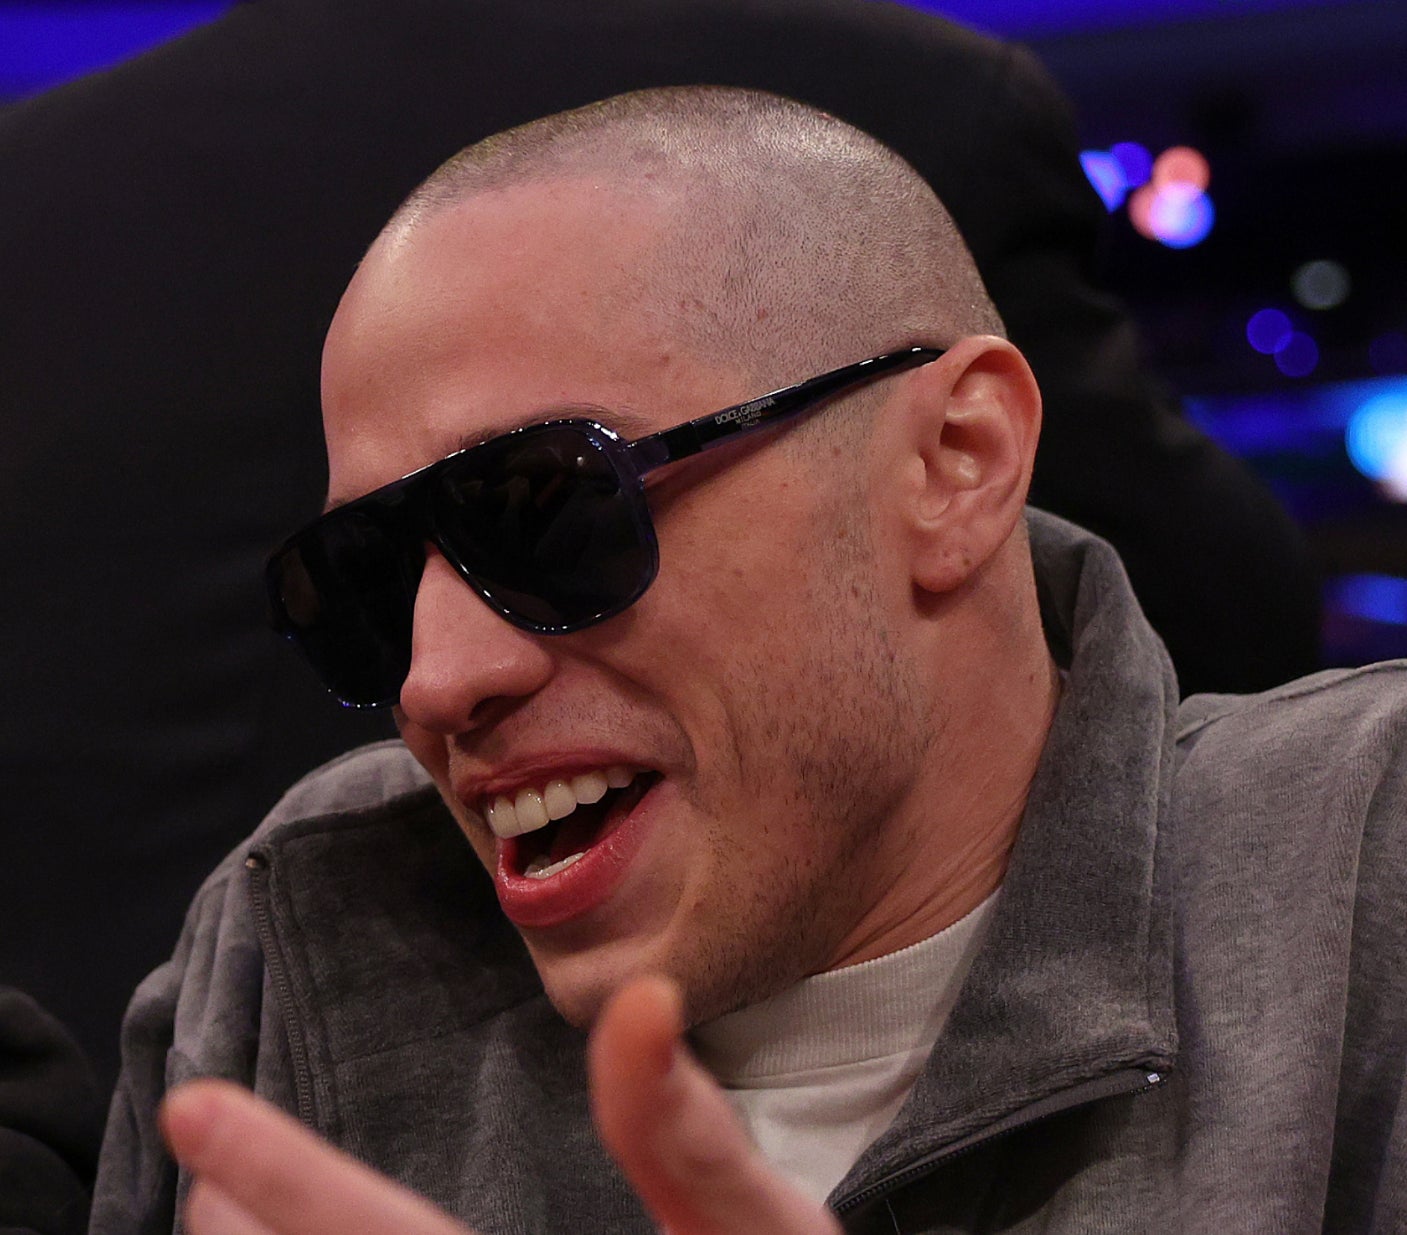 closeup of him with a shaved head wearing sunglasses